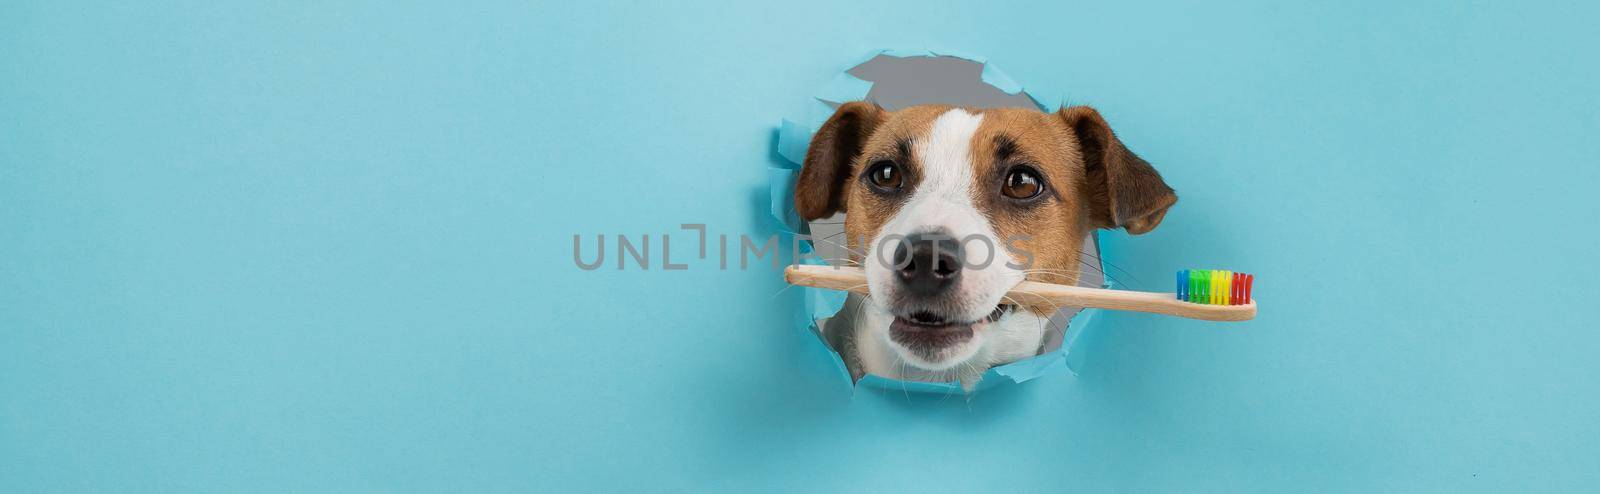 The muzzle of a Jack Russell Terrier sticks out through a hole in a paper blue background and holds an orange toothbrush. by mrwed54